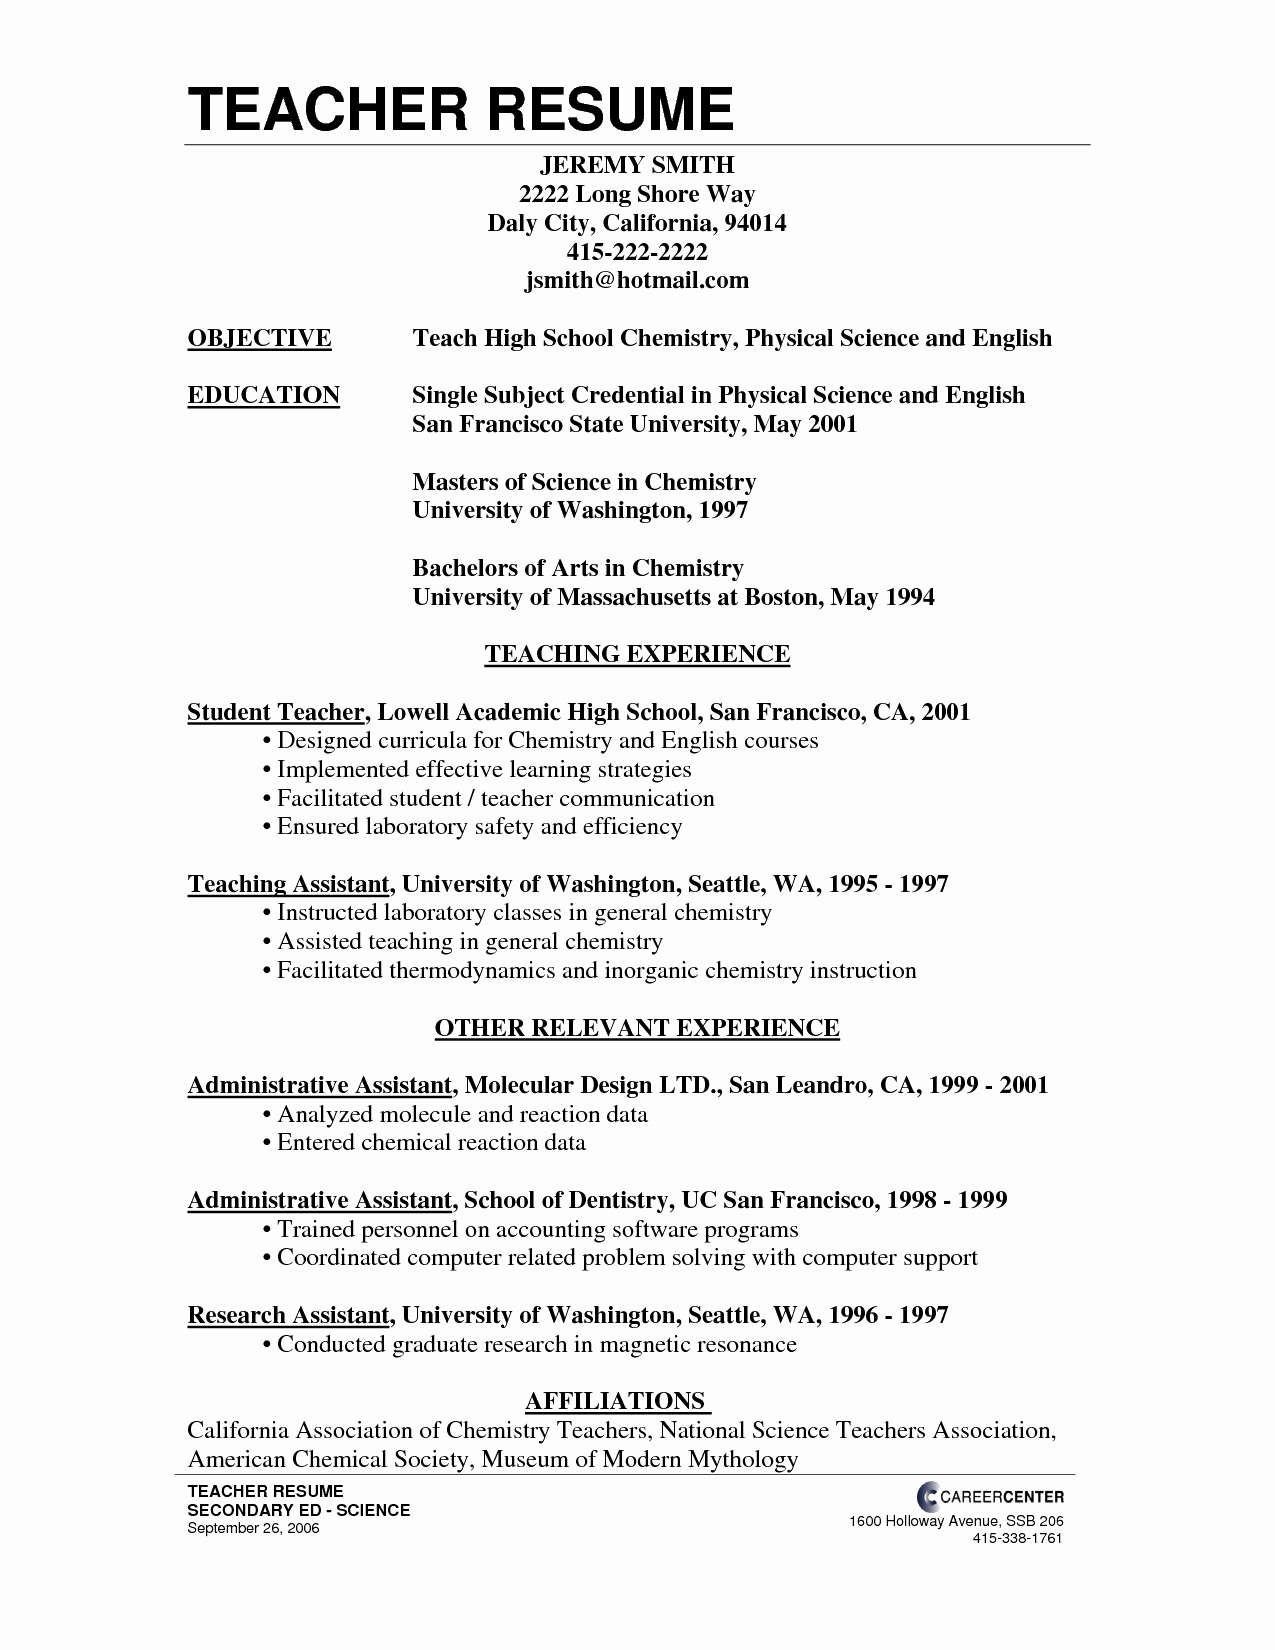 Professional Cover Letter Template Free - Resume Cover Letter Example New Free Cover Letter Templates Examples